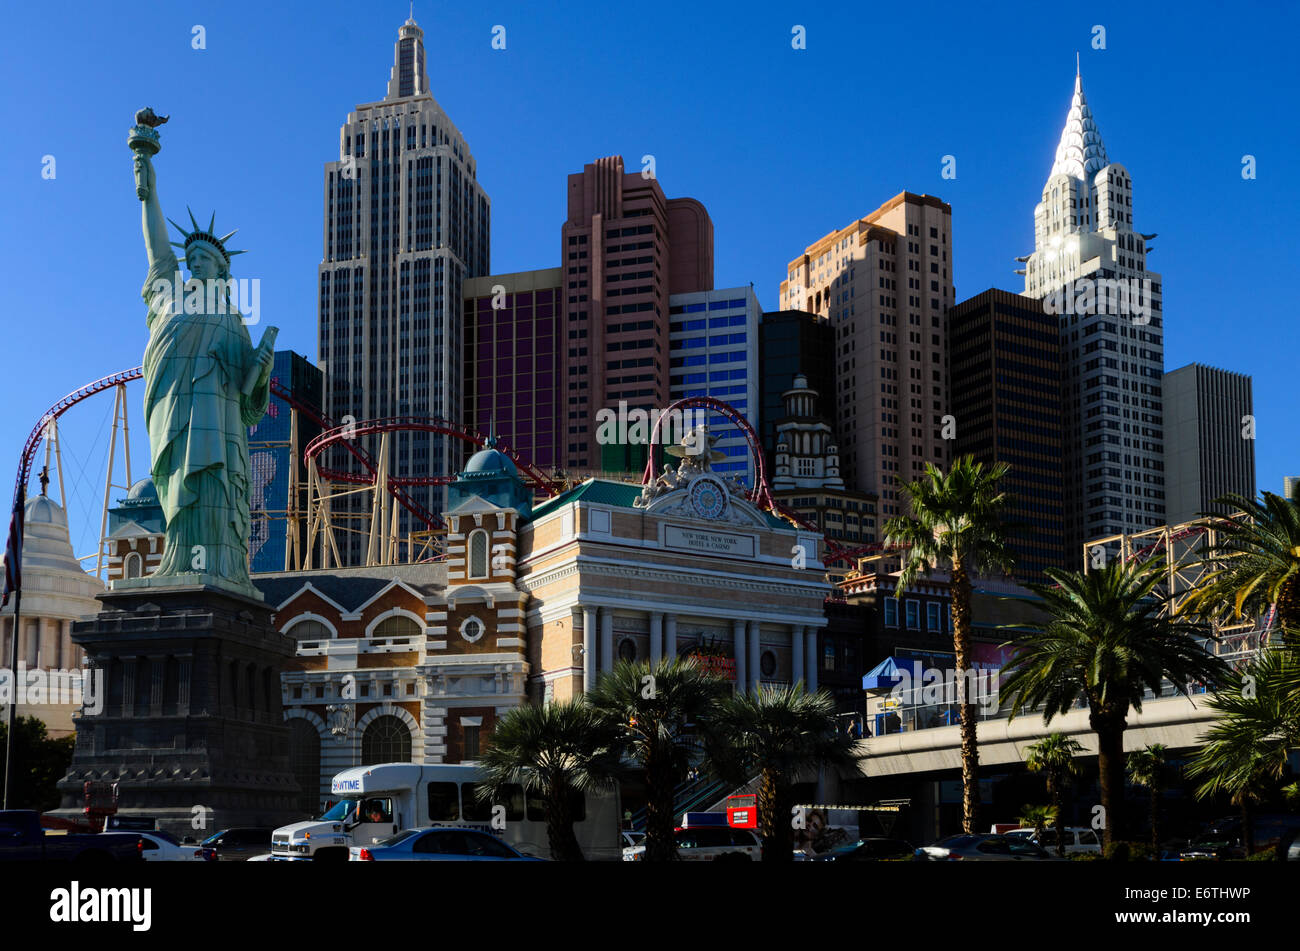 New York New York Hotel & Casino in Las Vegas Strip which gives the impression of the New York skyline Stock Photo